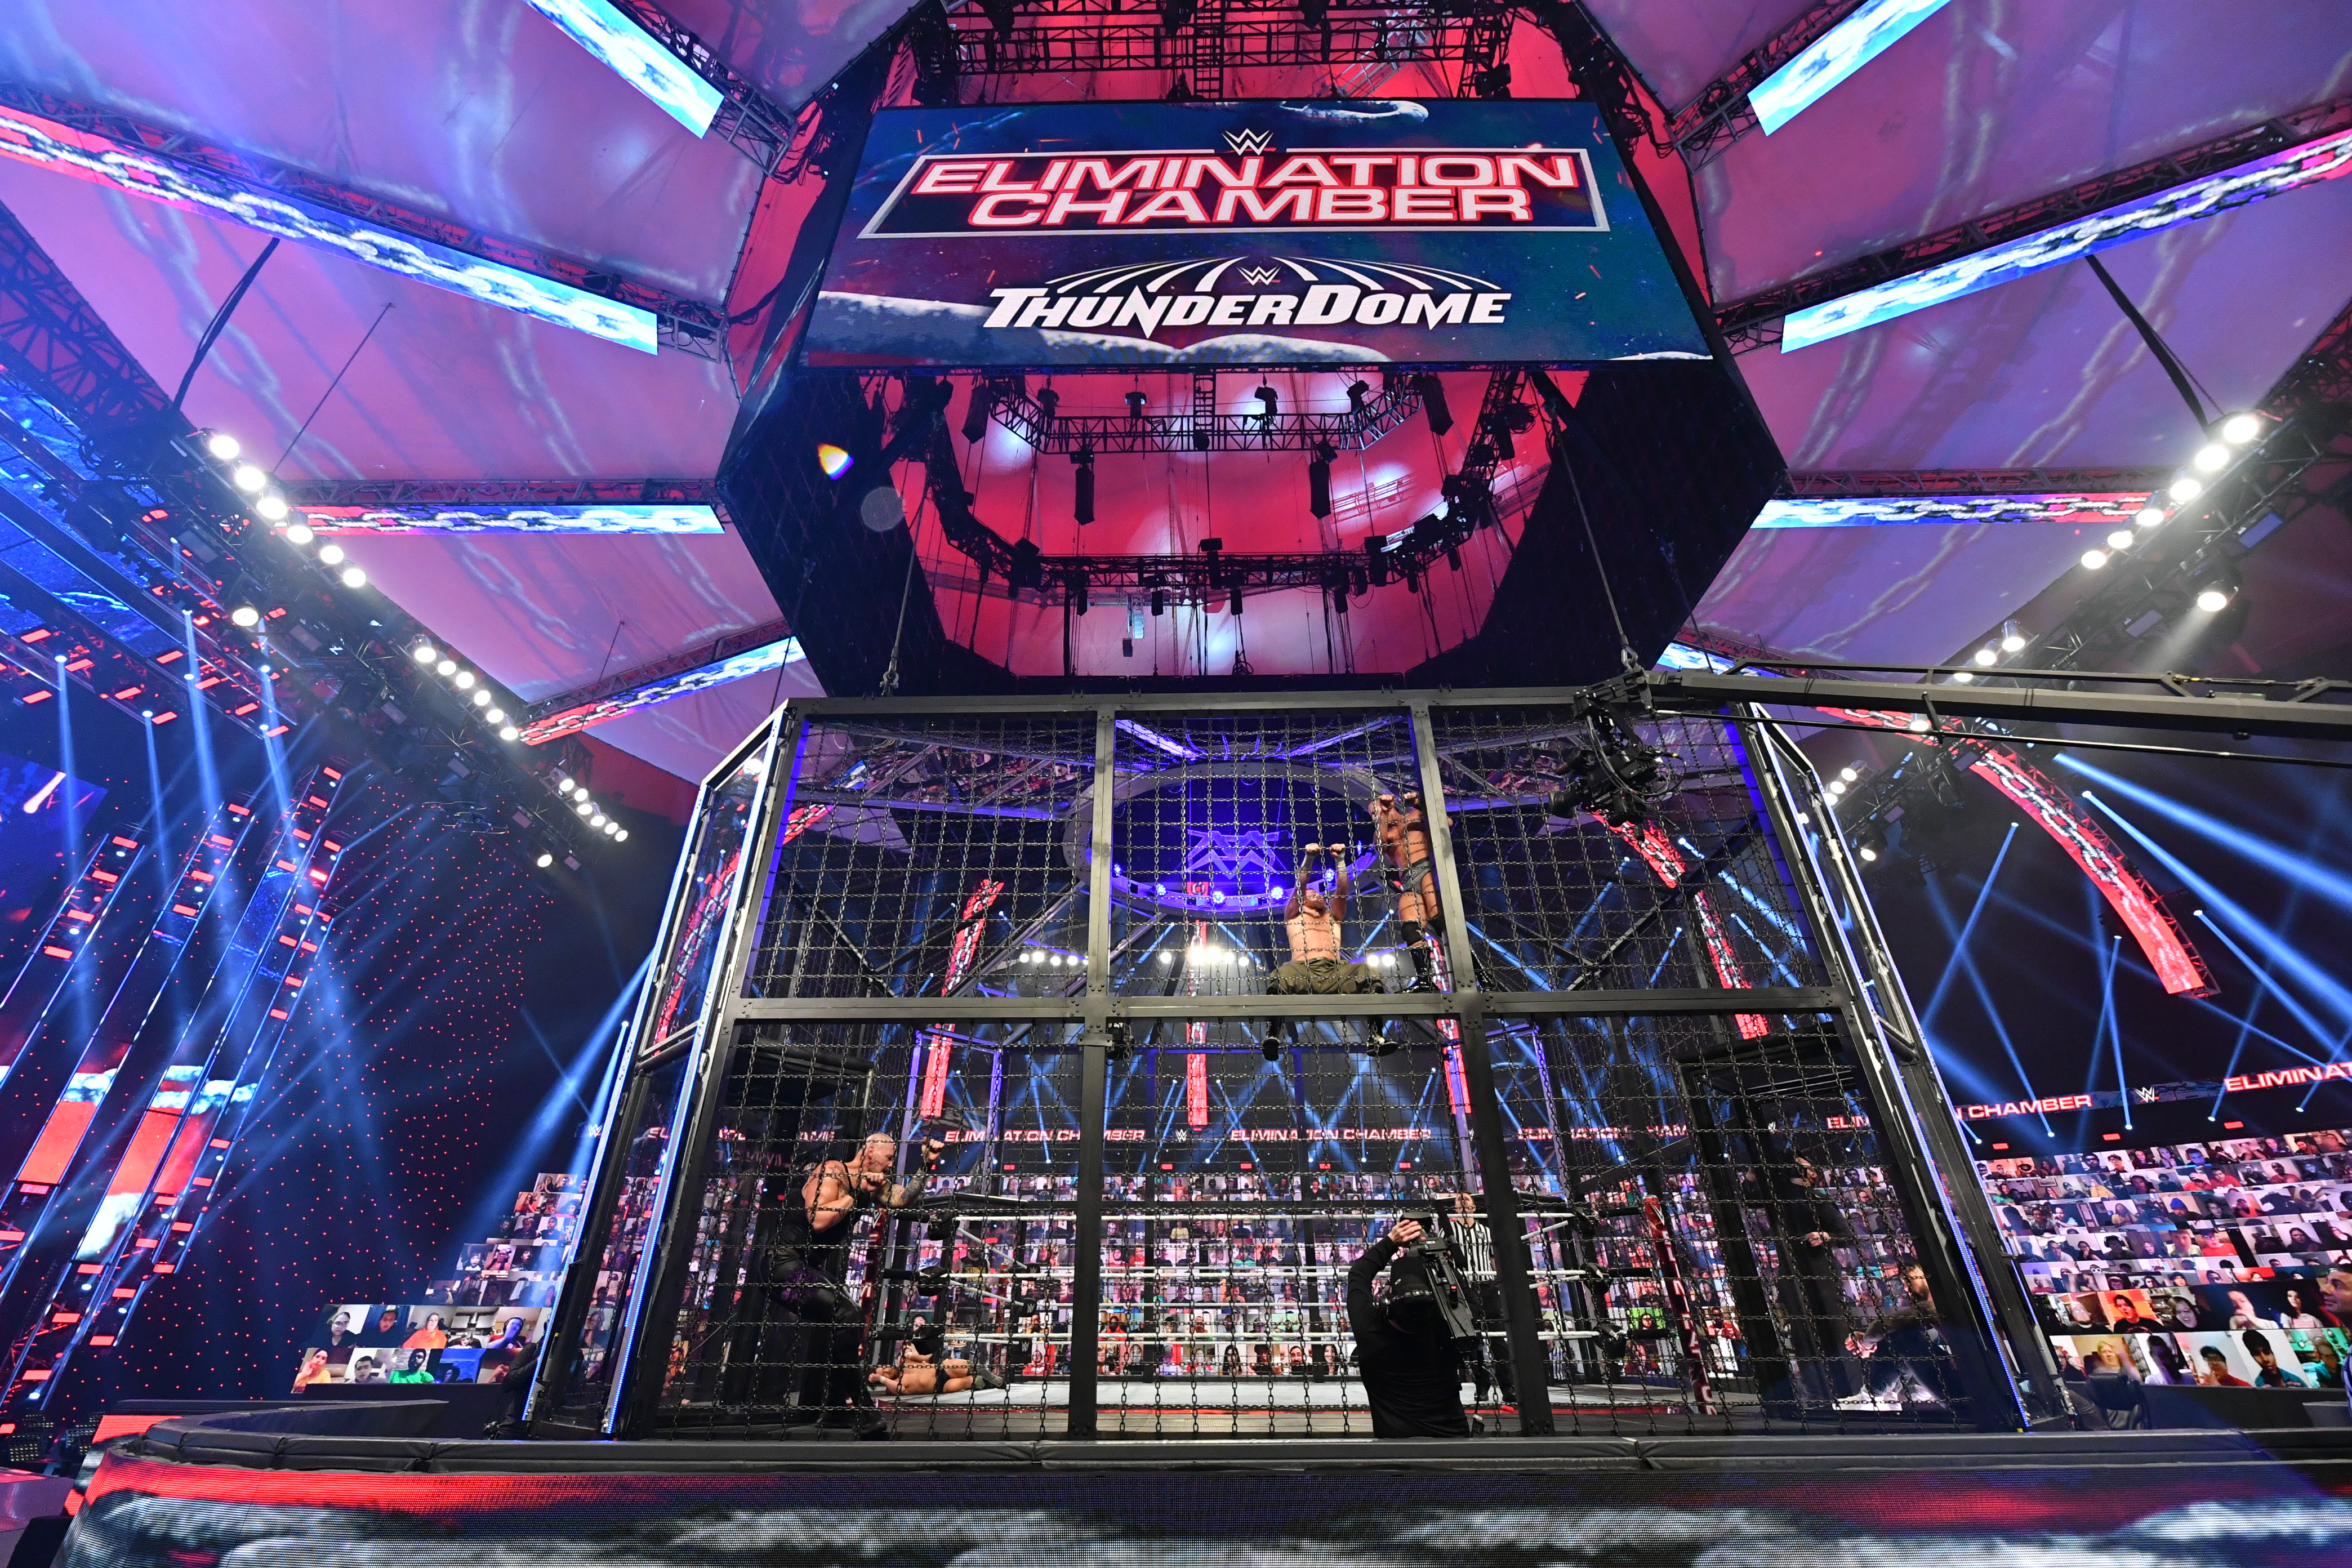 Elimination Chamber is the final major WWE PPV before WrestleMania